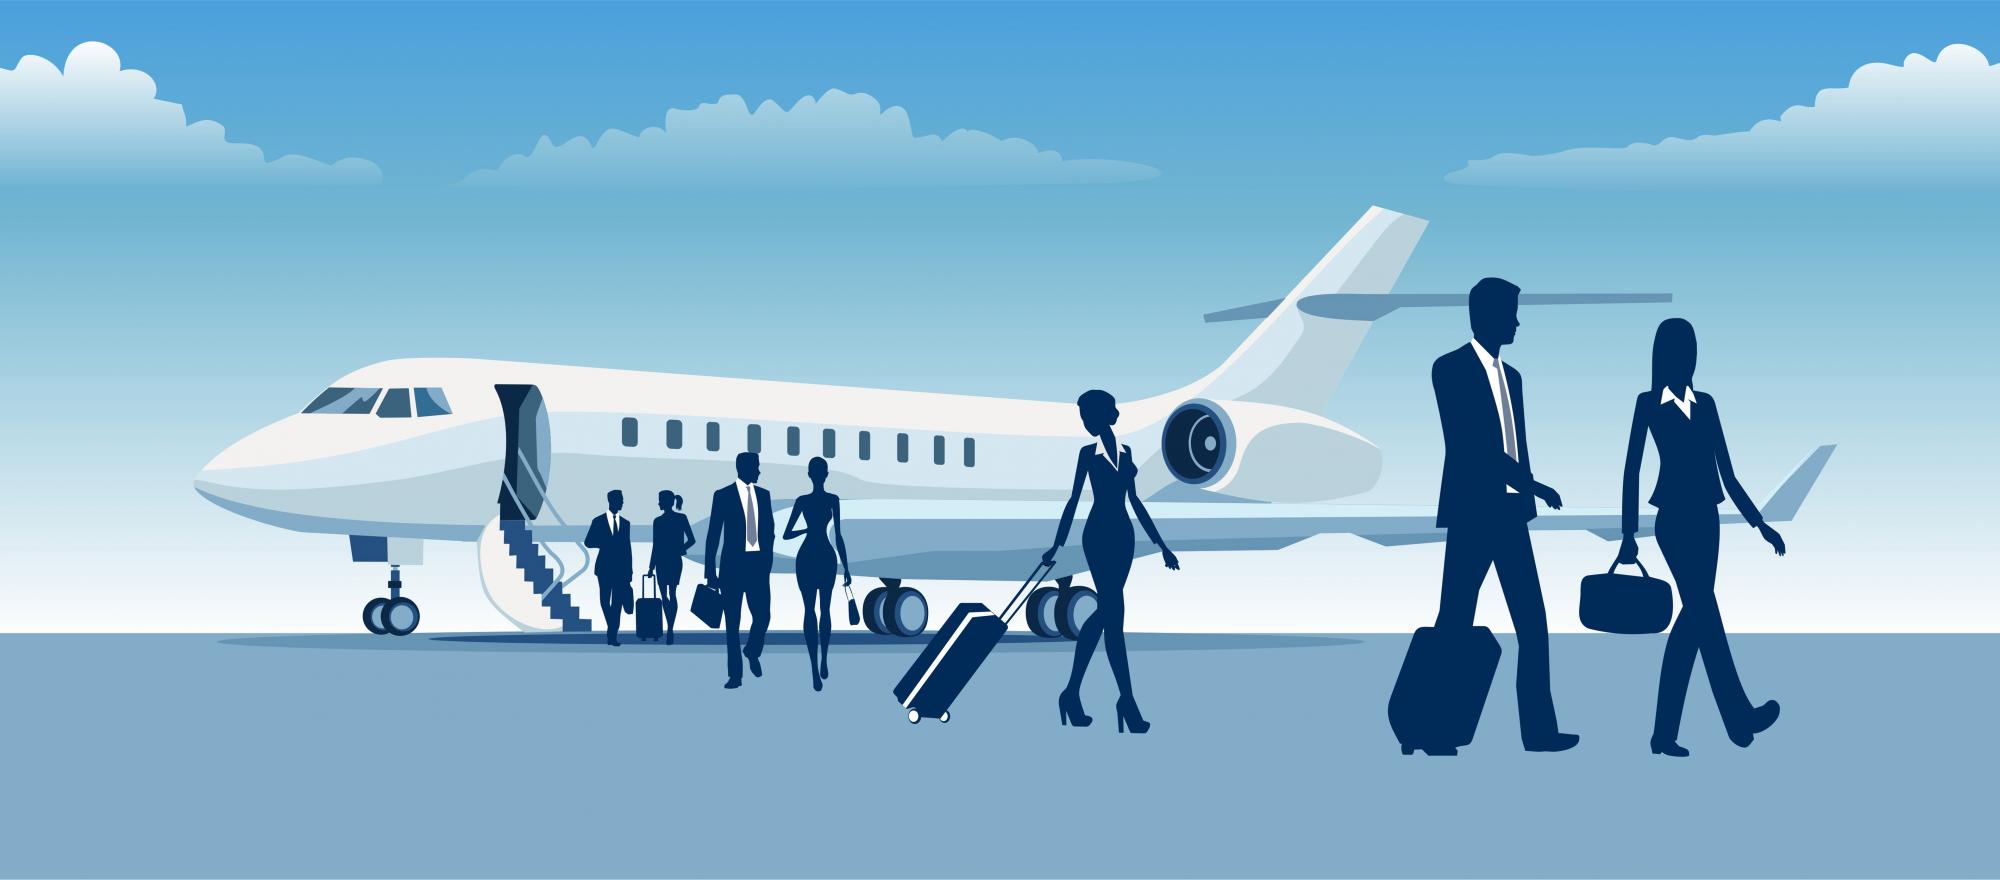 illustration of business jet and passengers